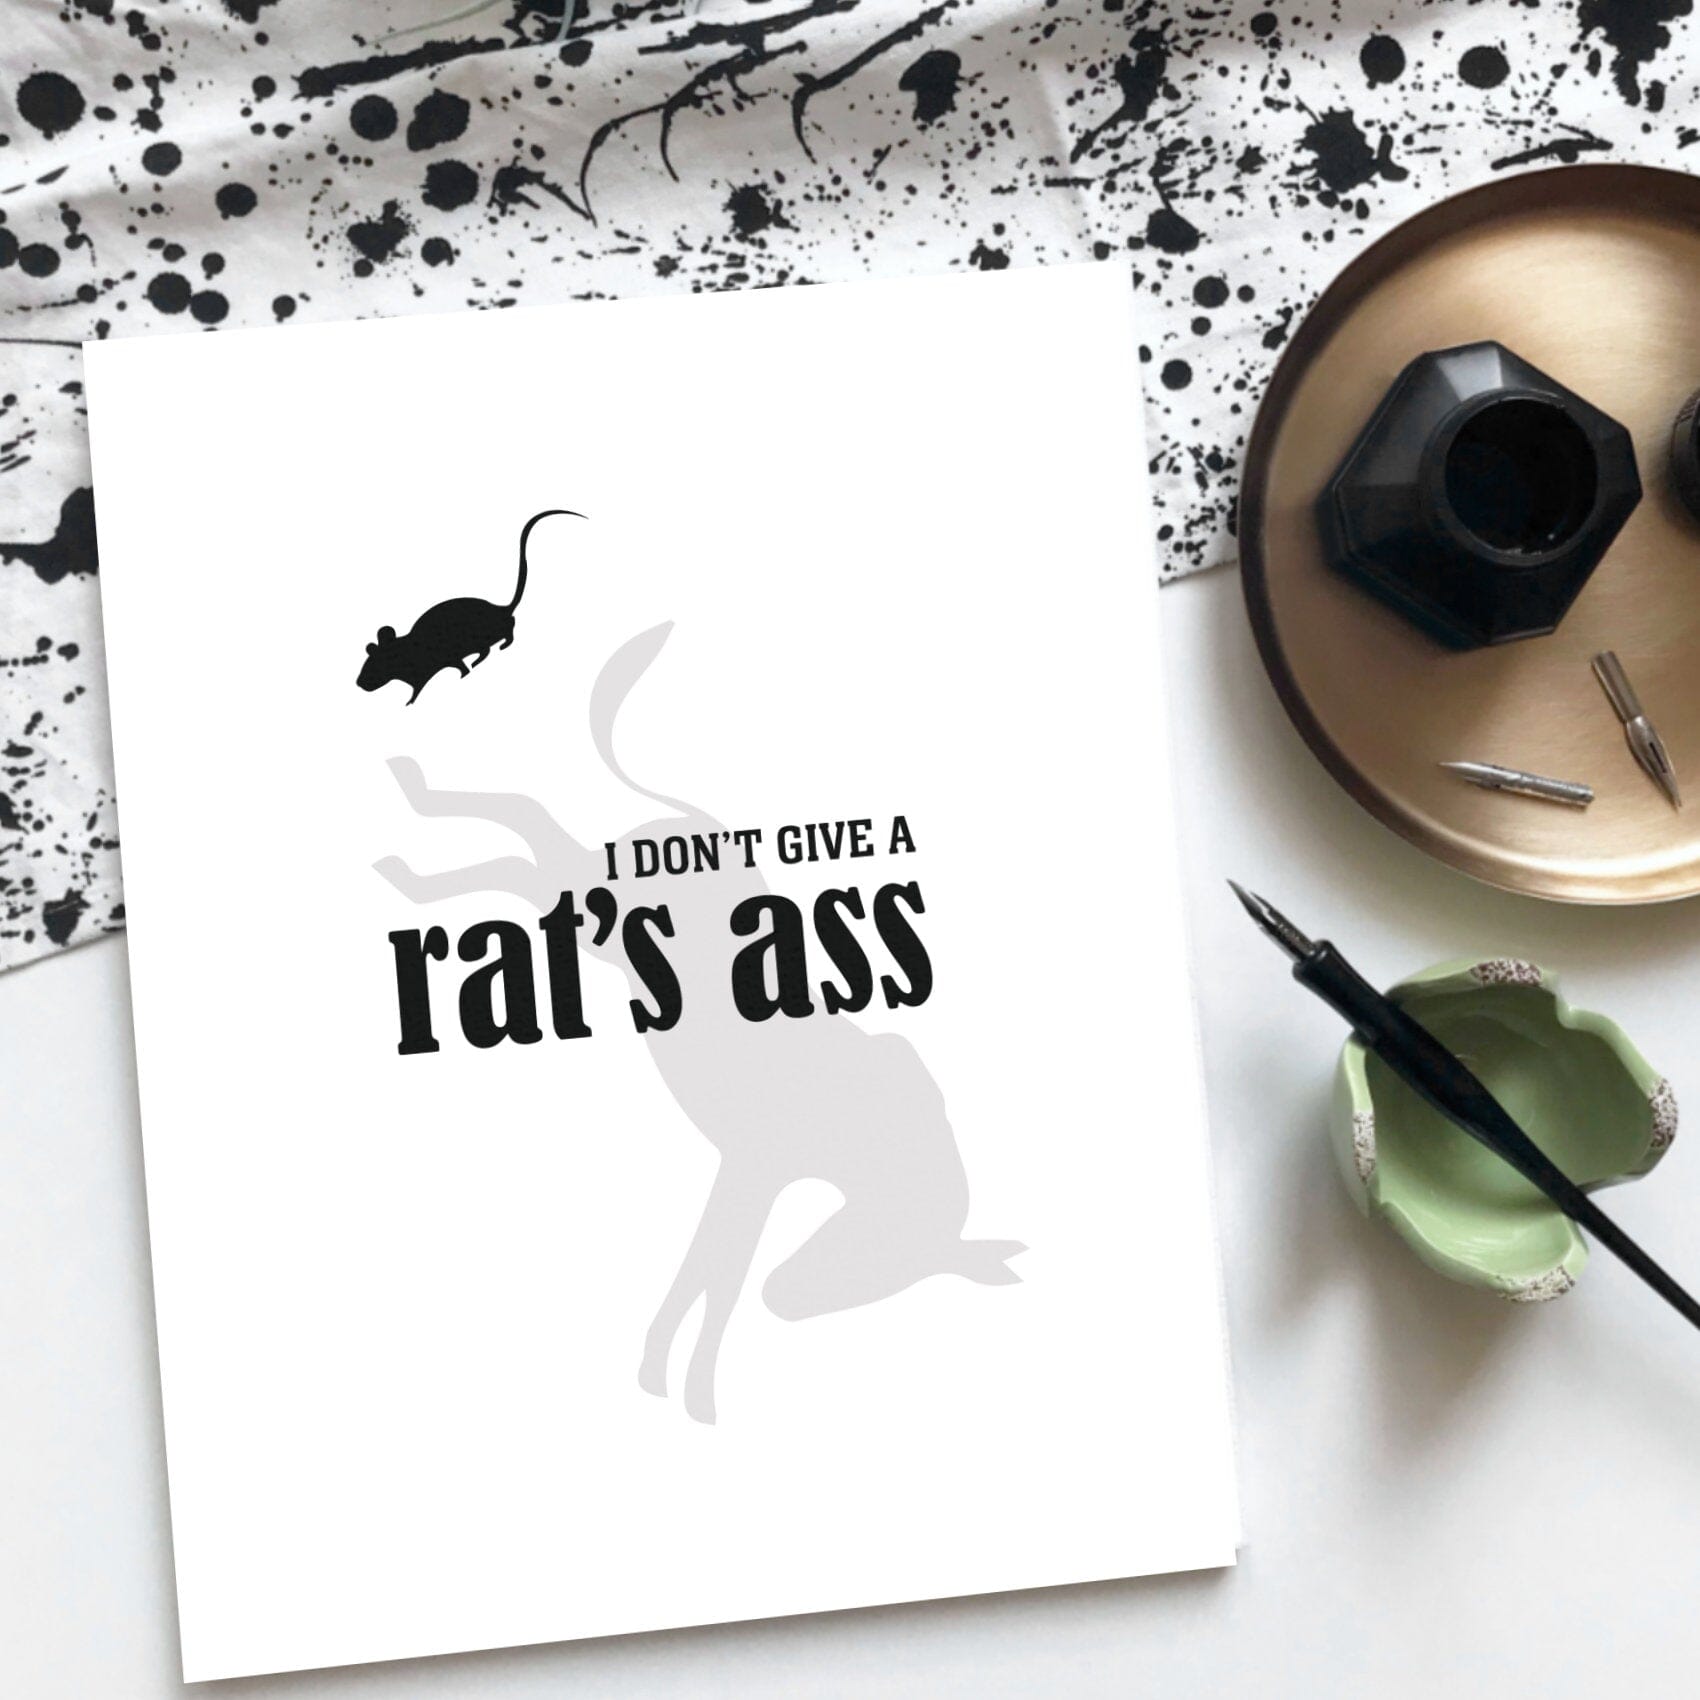 I Don't Give a Rat's Ass - Wise and Witty Sarcastic Print Wise and Wiseass Quotes Song Lyrics Art 8x10 Unframed Print 